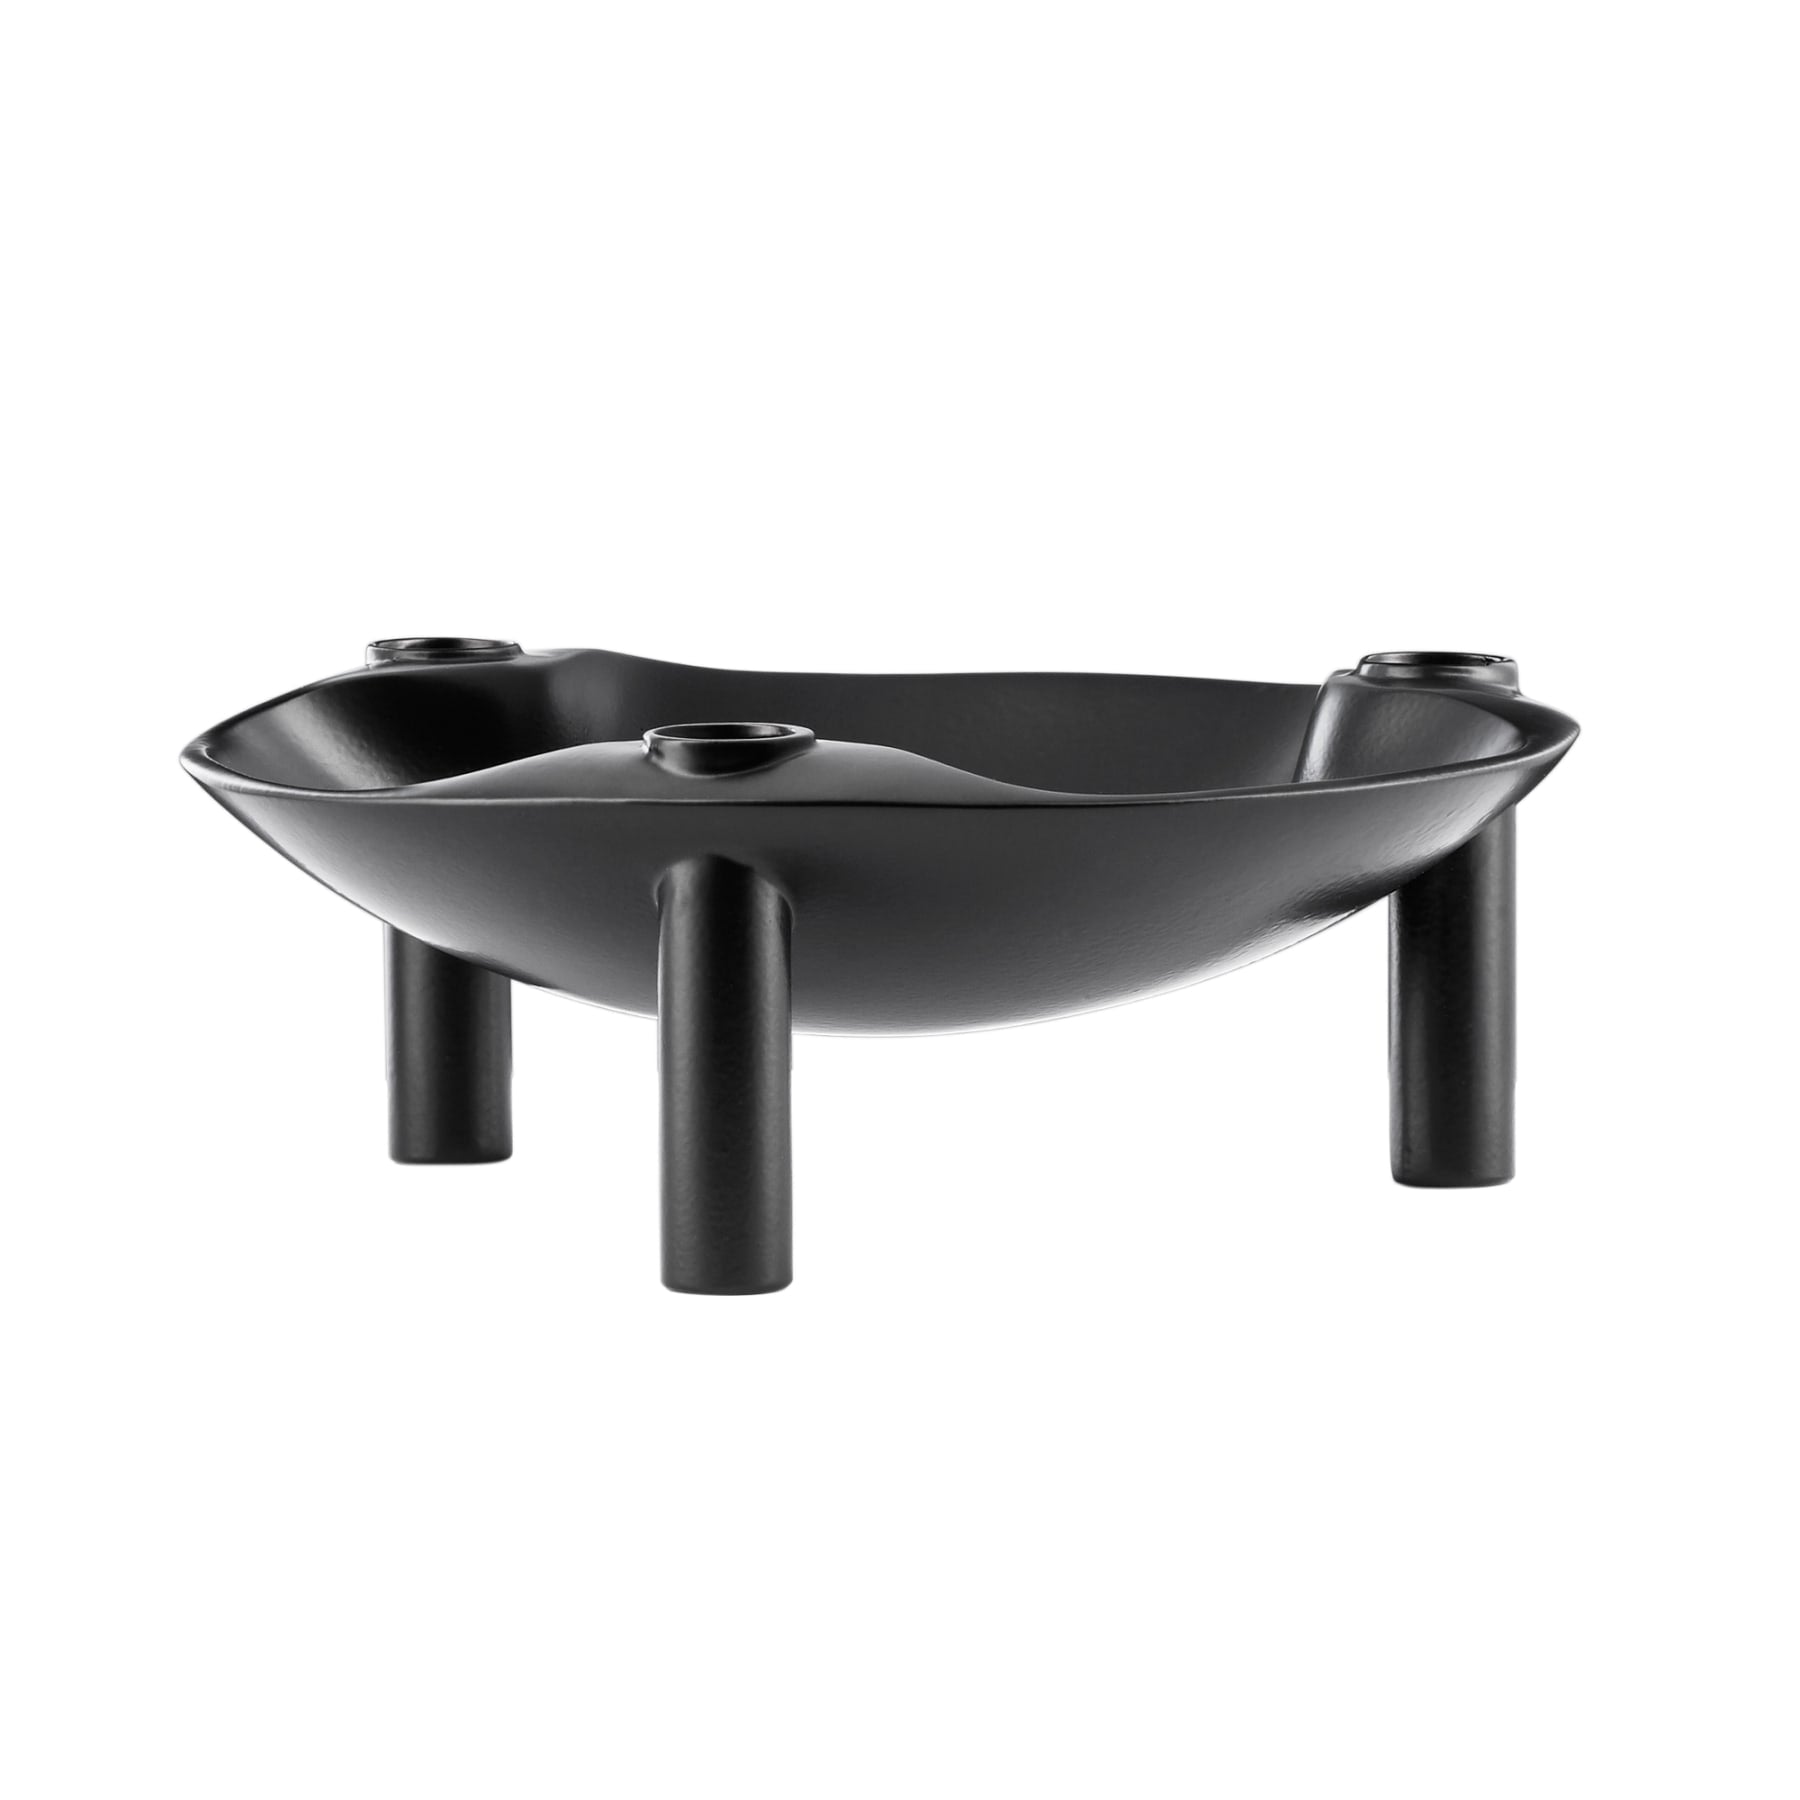 Candle Holder Bowl - Black - THAT COOL LIVING